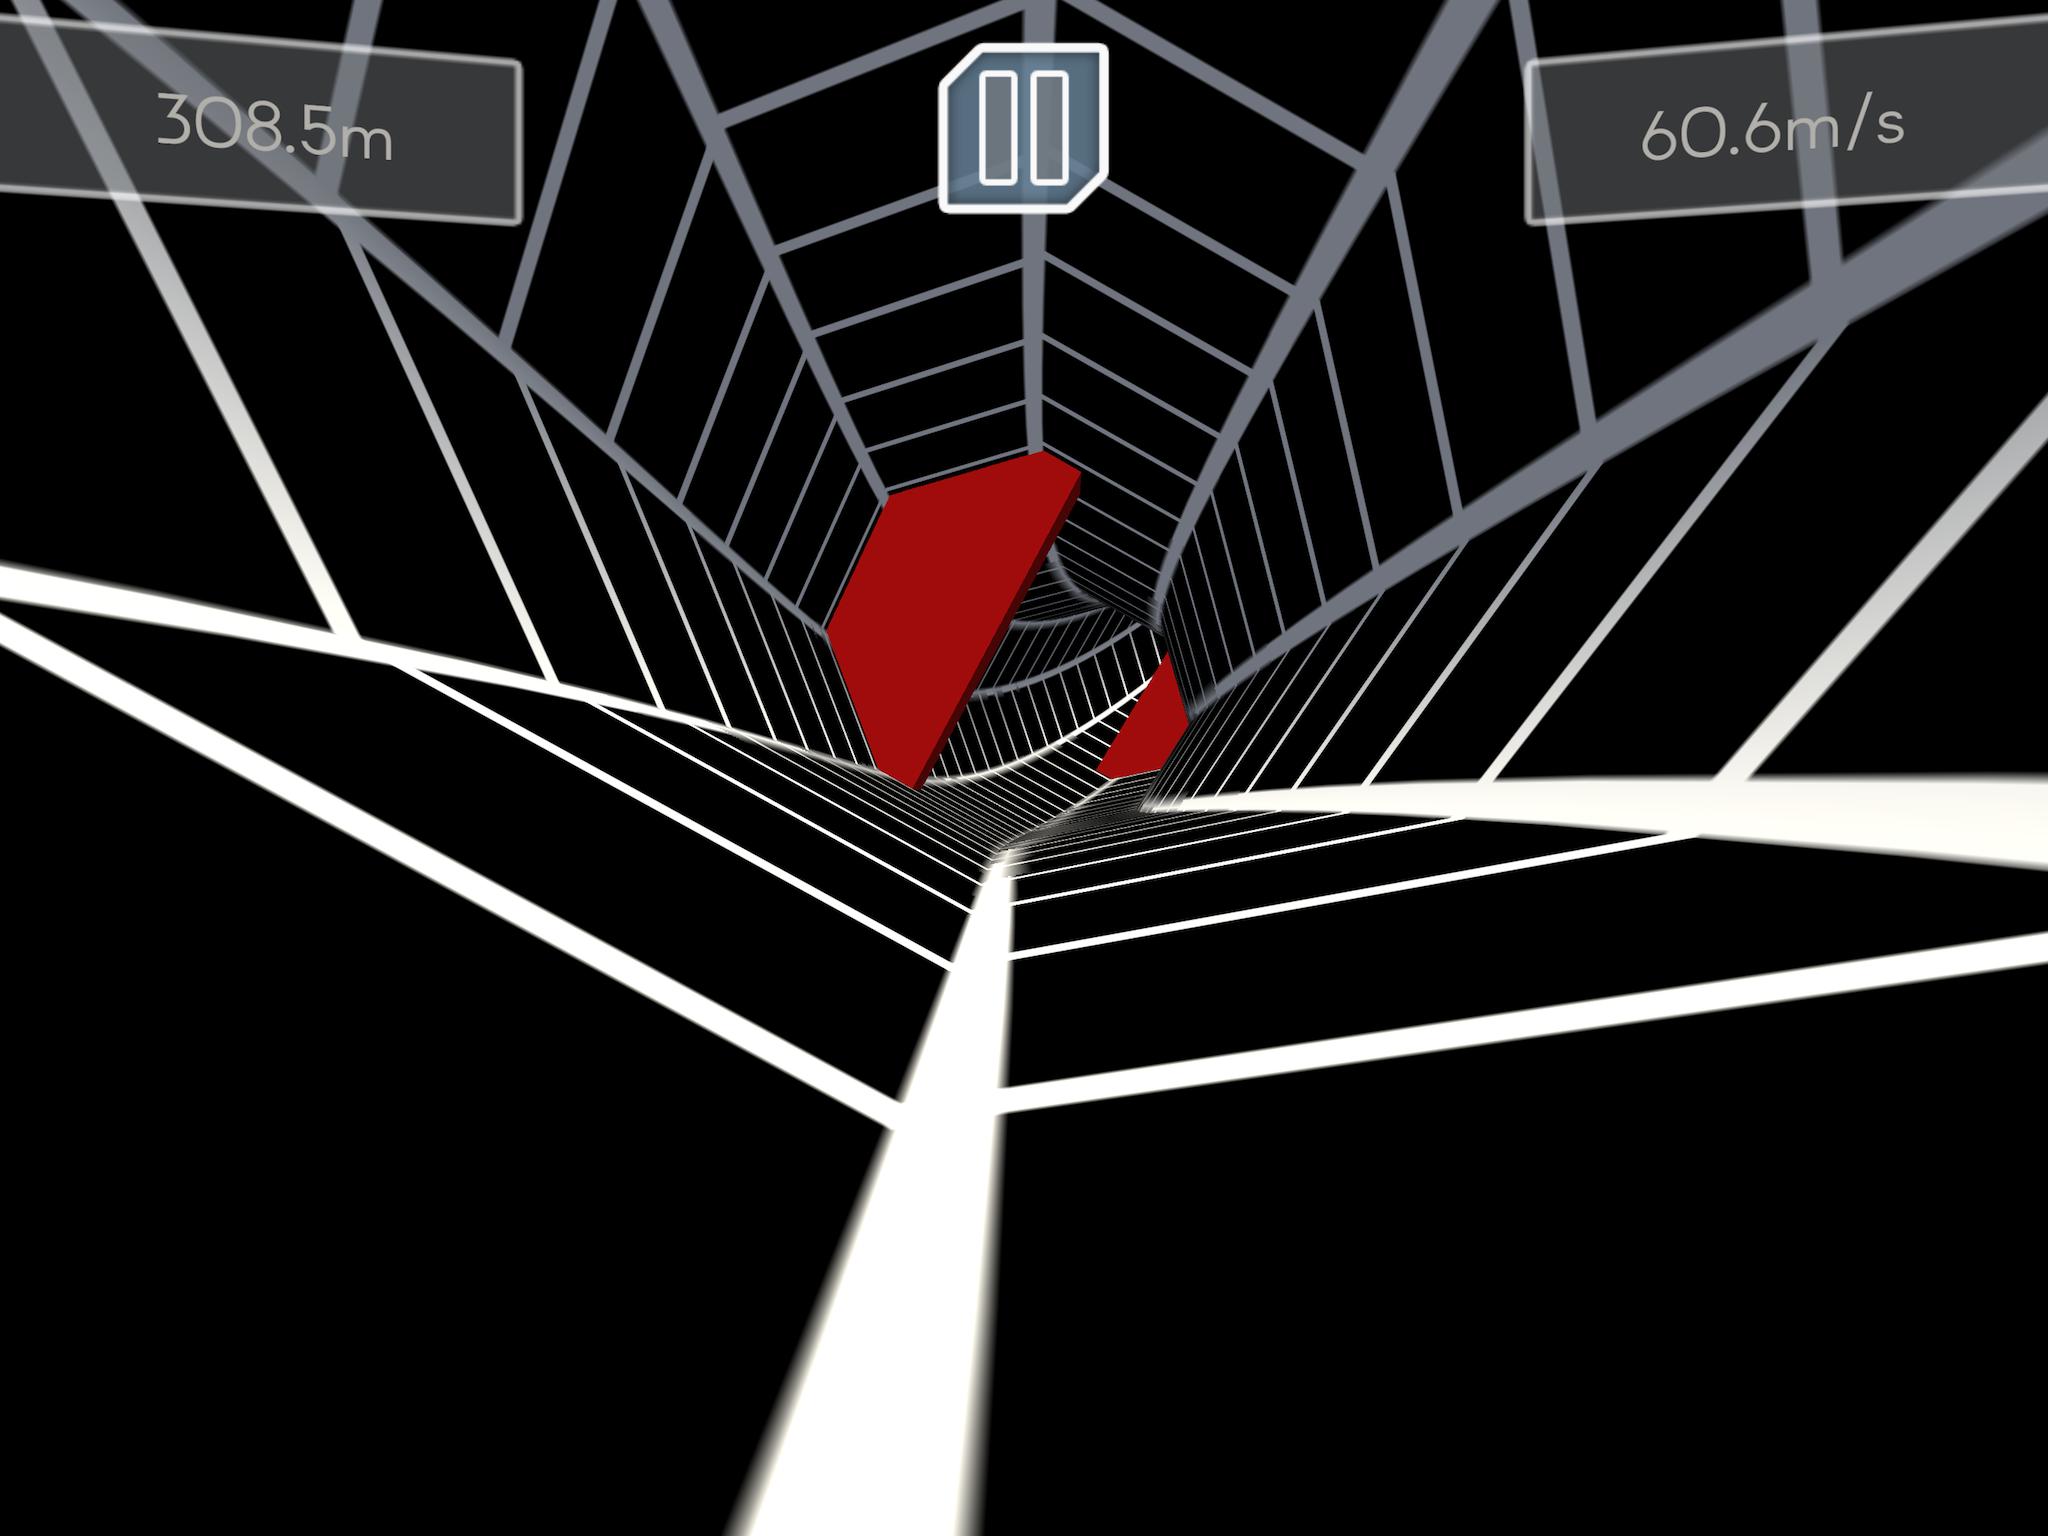 Tunnel Rush APK for Android - Download